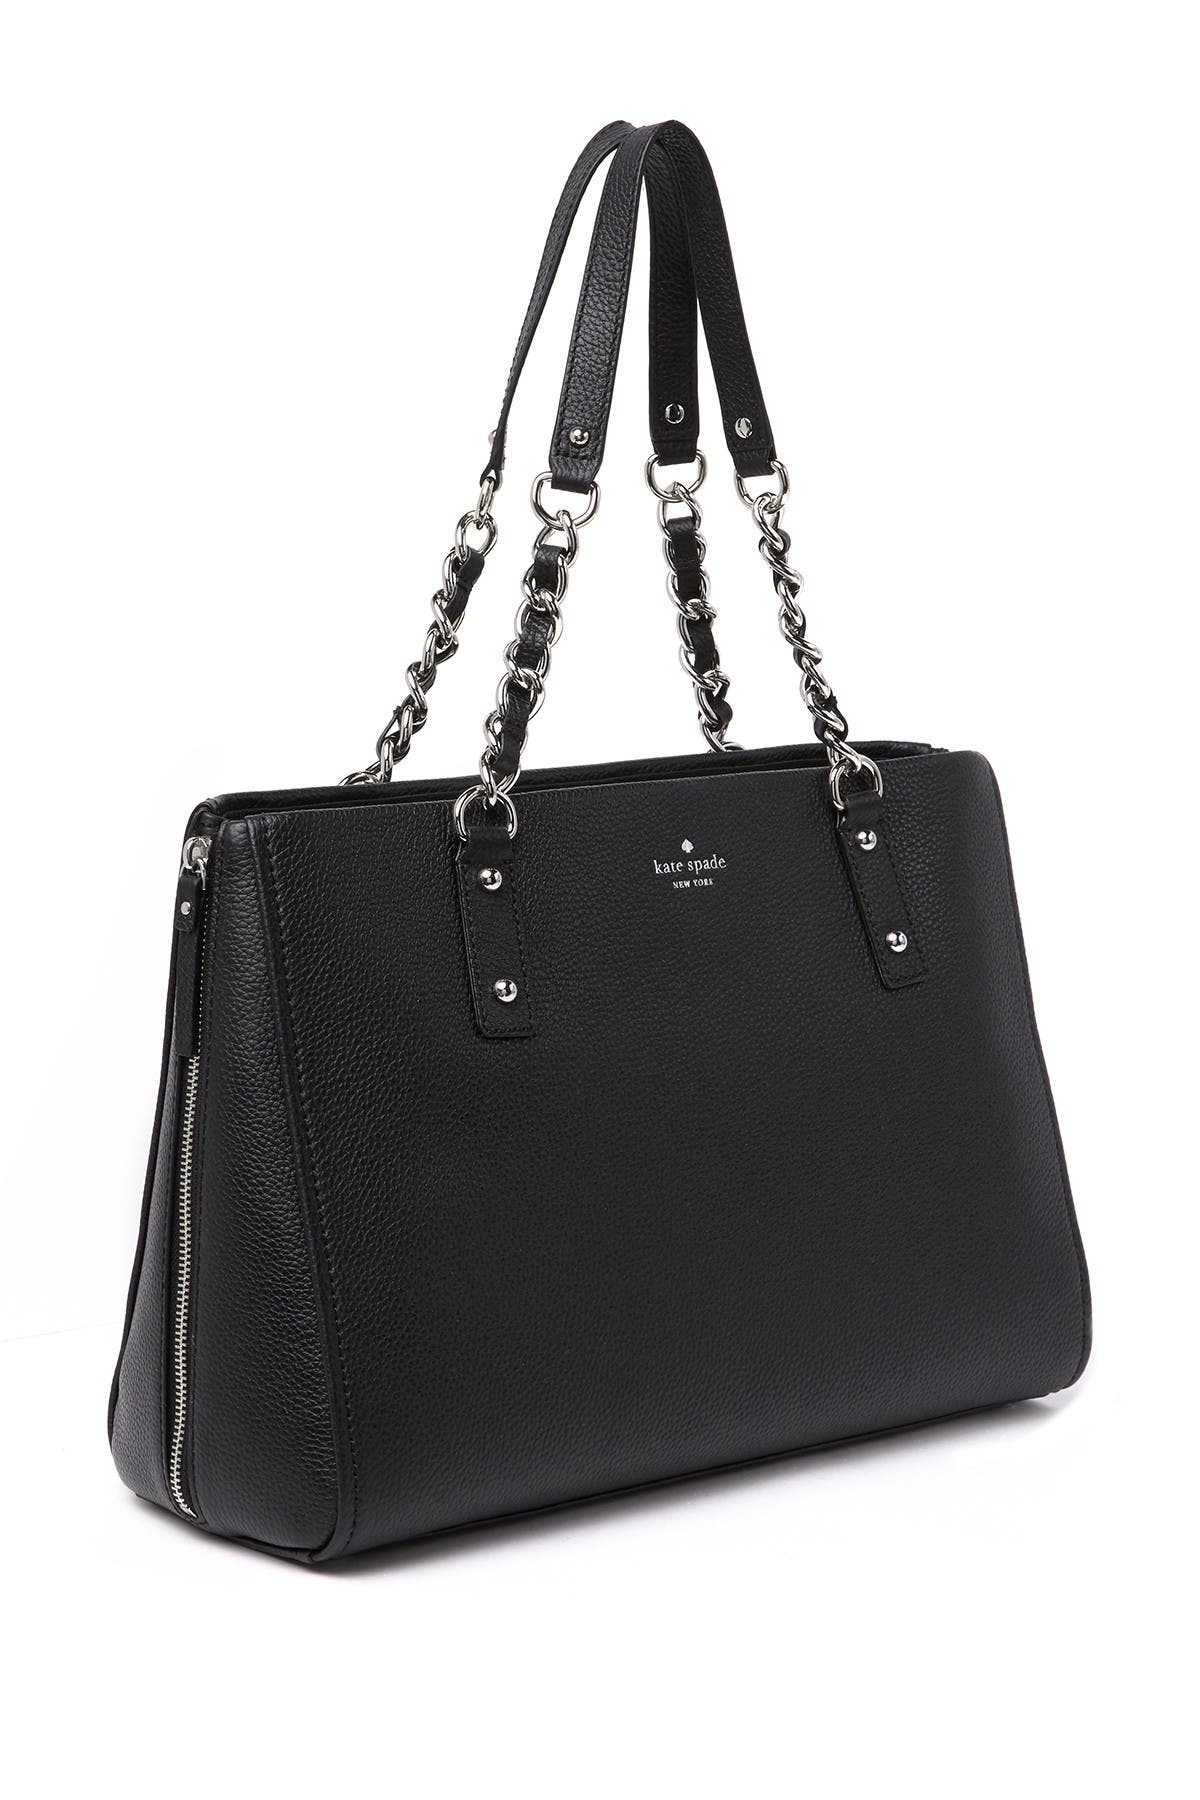 Kate Spade Cobble Hill Andee Leather Satchel In Black